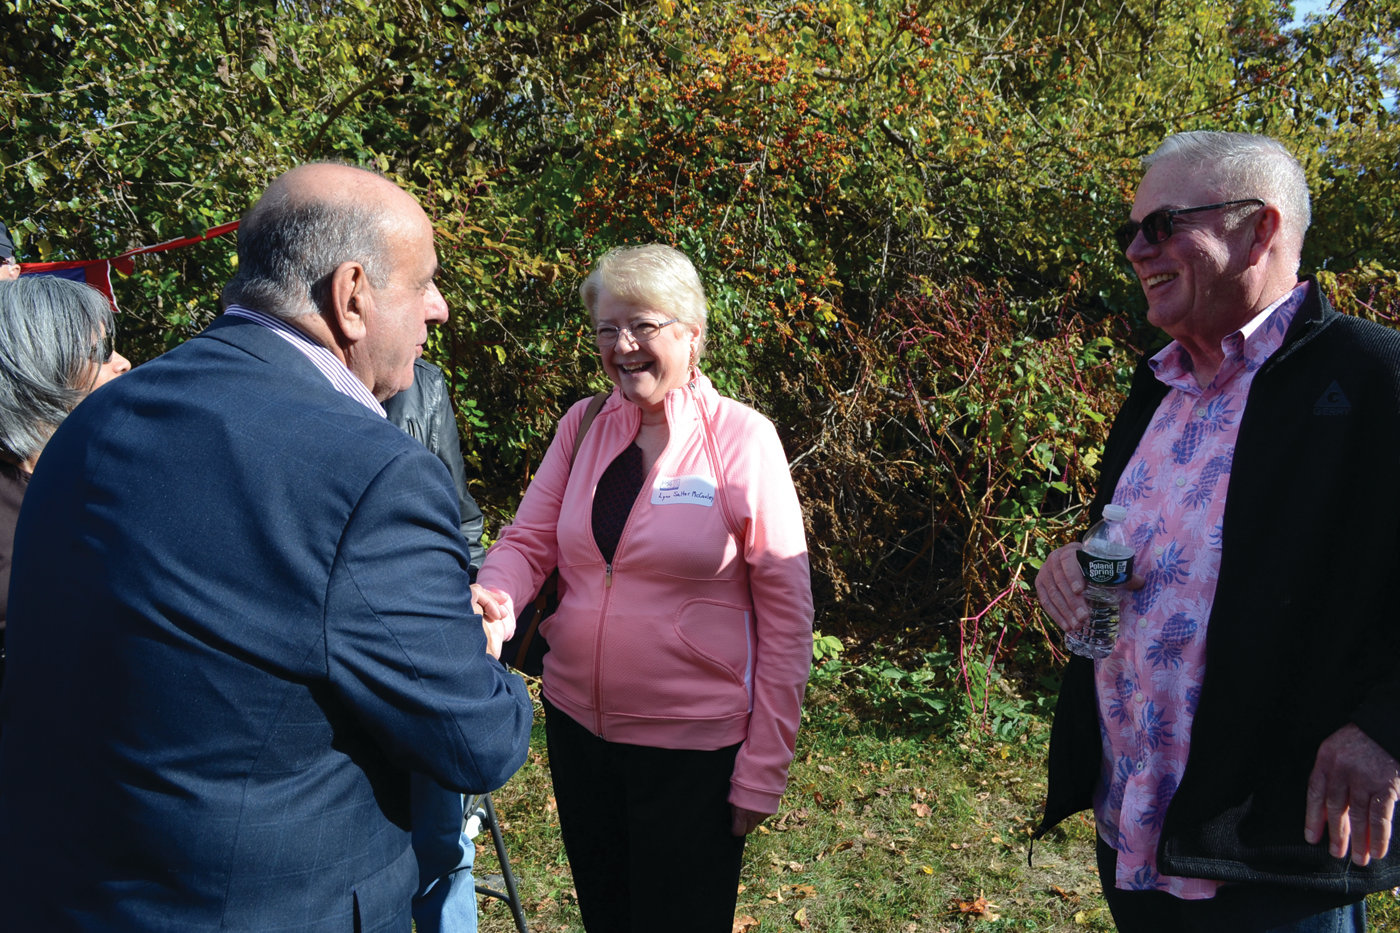 NAMESAKE: Lynn Salter McCauley, granddaughter of George B. Salter, for whom the park was named, took part in the celebration of the renewed park on Saturday. She is with Mayor Joseph Solomon and Warwick State Rep. Joseph McNamara.